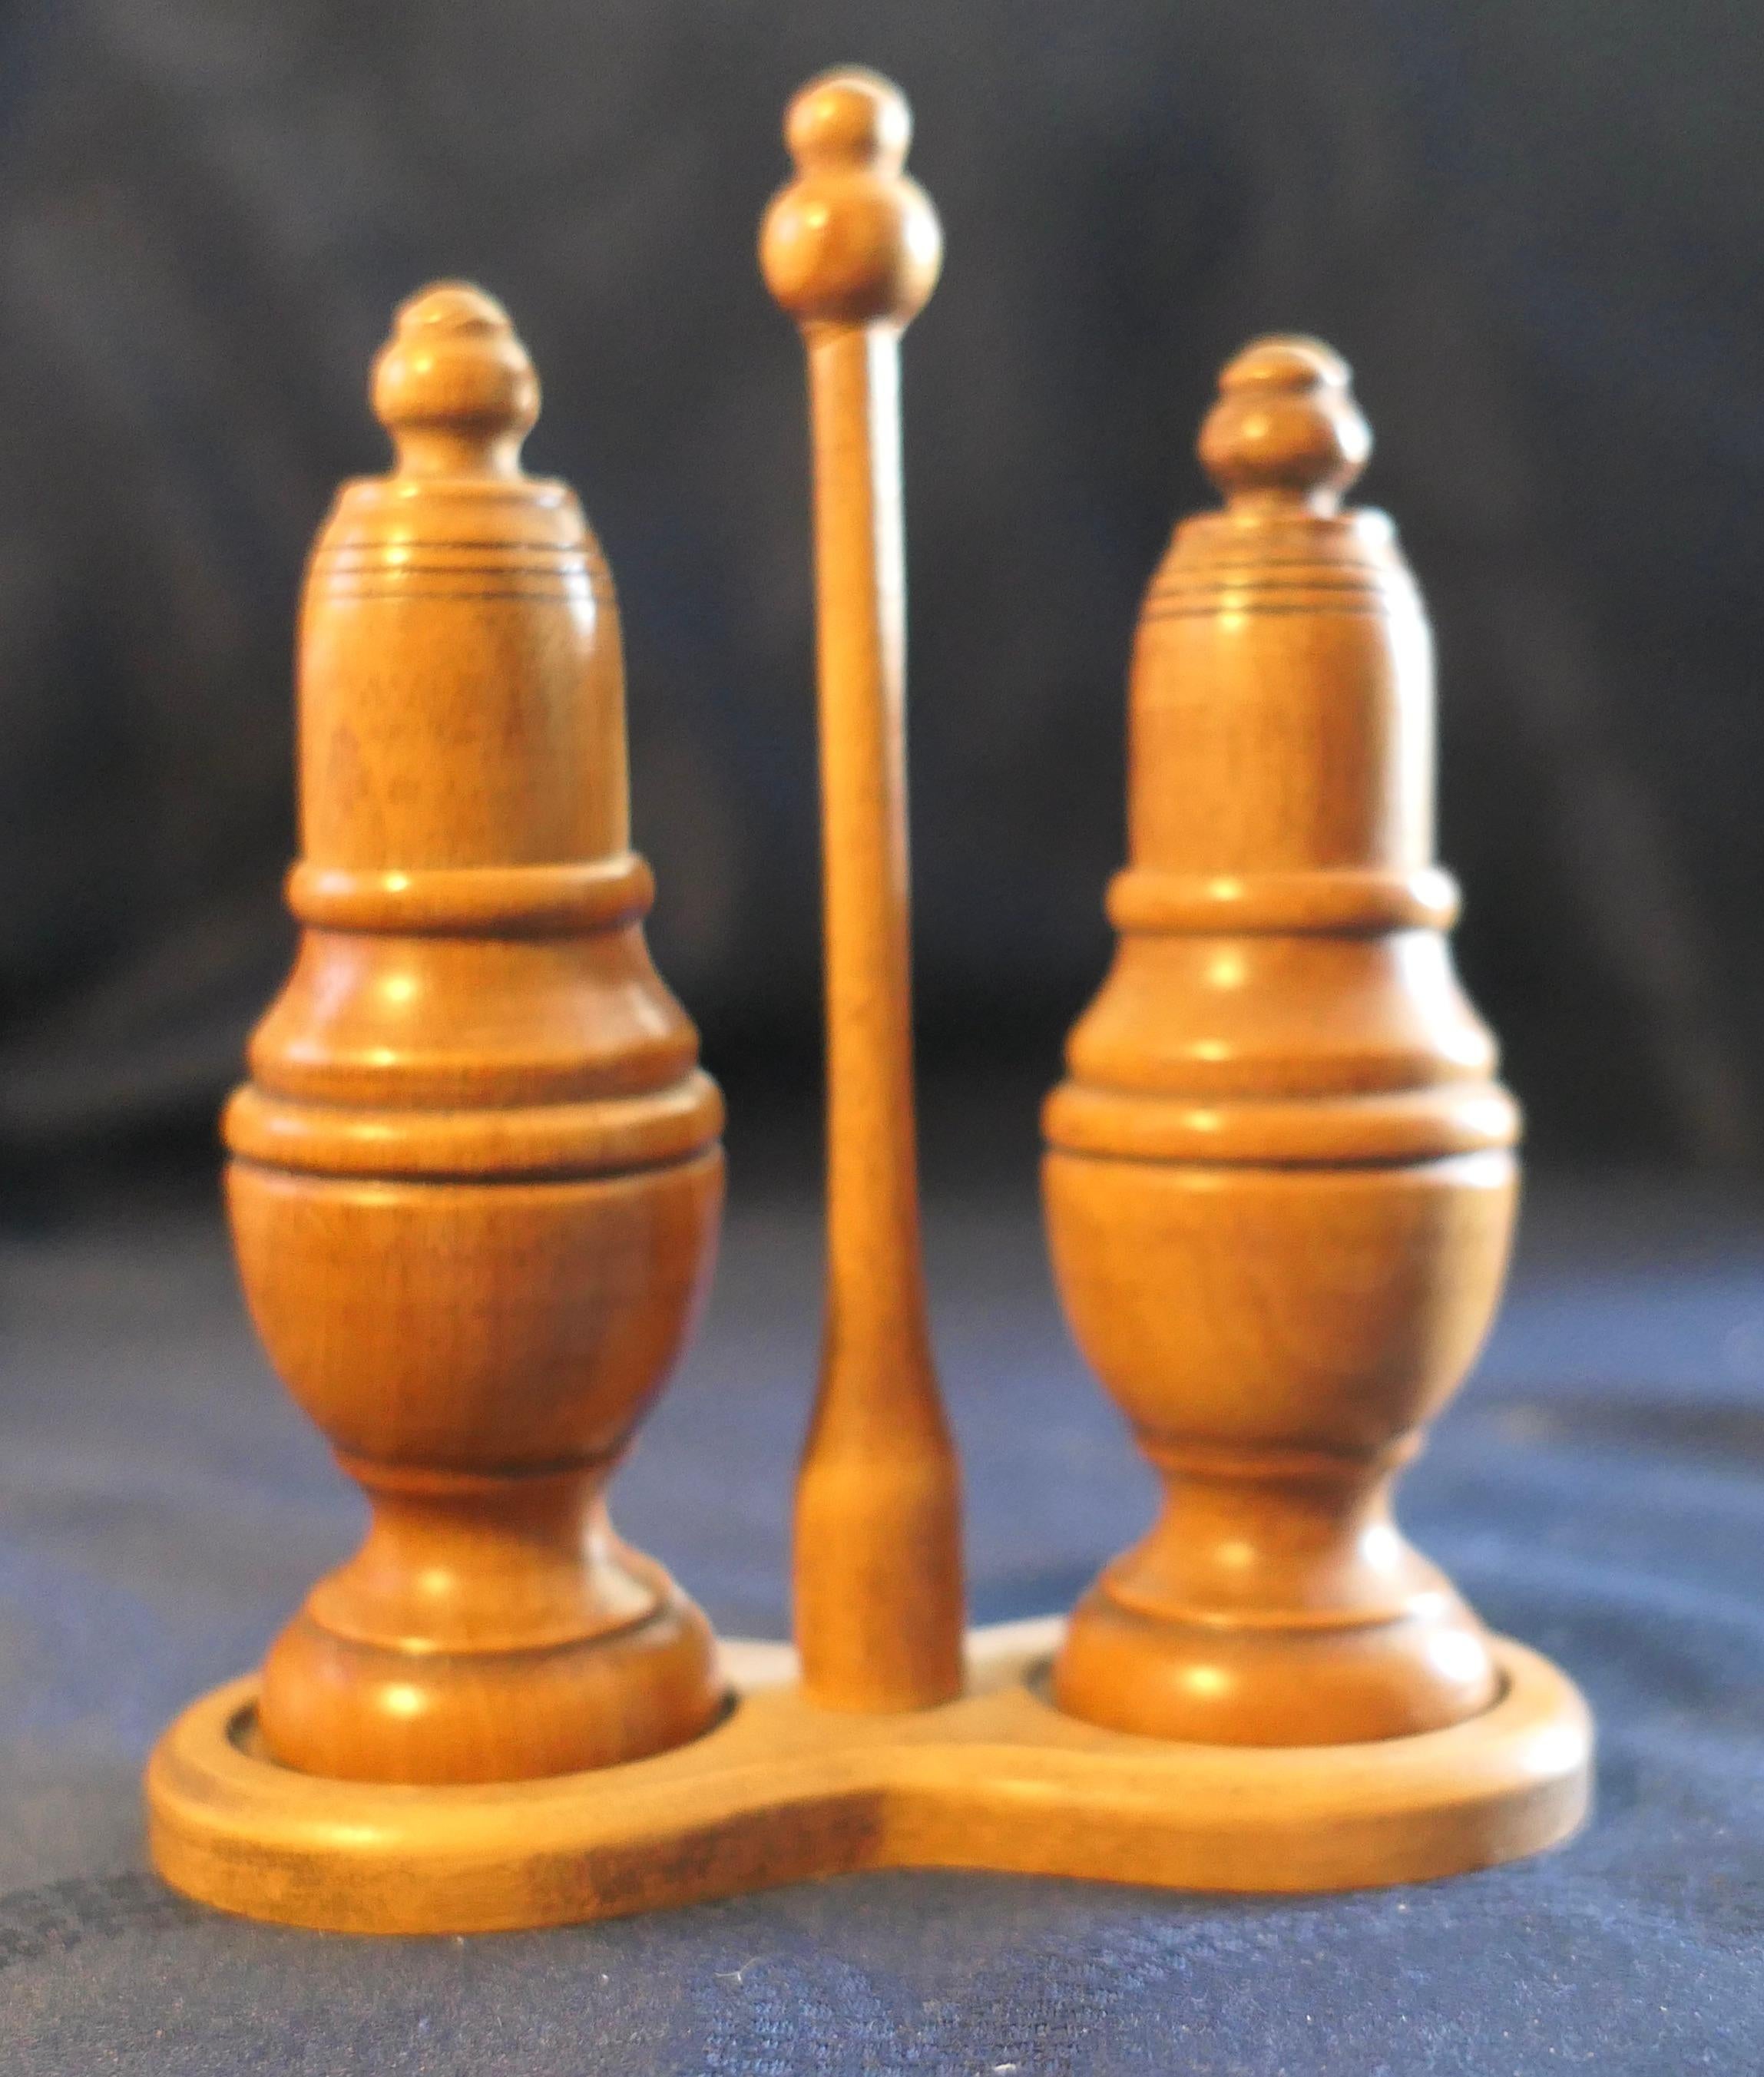 19th Century Beech Treen Salt and Pepper Shakers on Stand

This beautiful set has been hand turned on a lathe in the Georgian style, the shakers come into 2 parts so that they can be  filled  
The wood has a wonderful colour and patina
The set is in